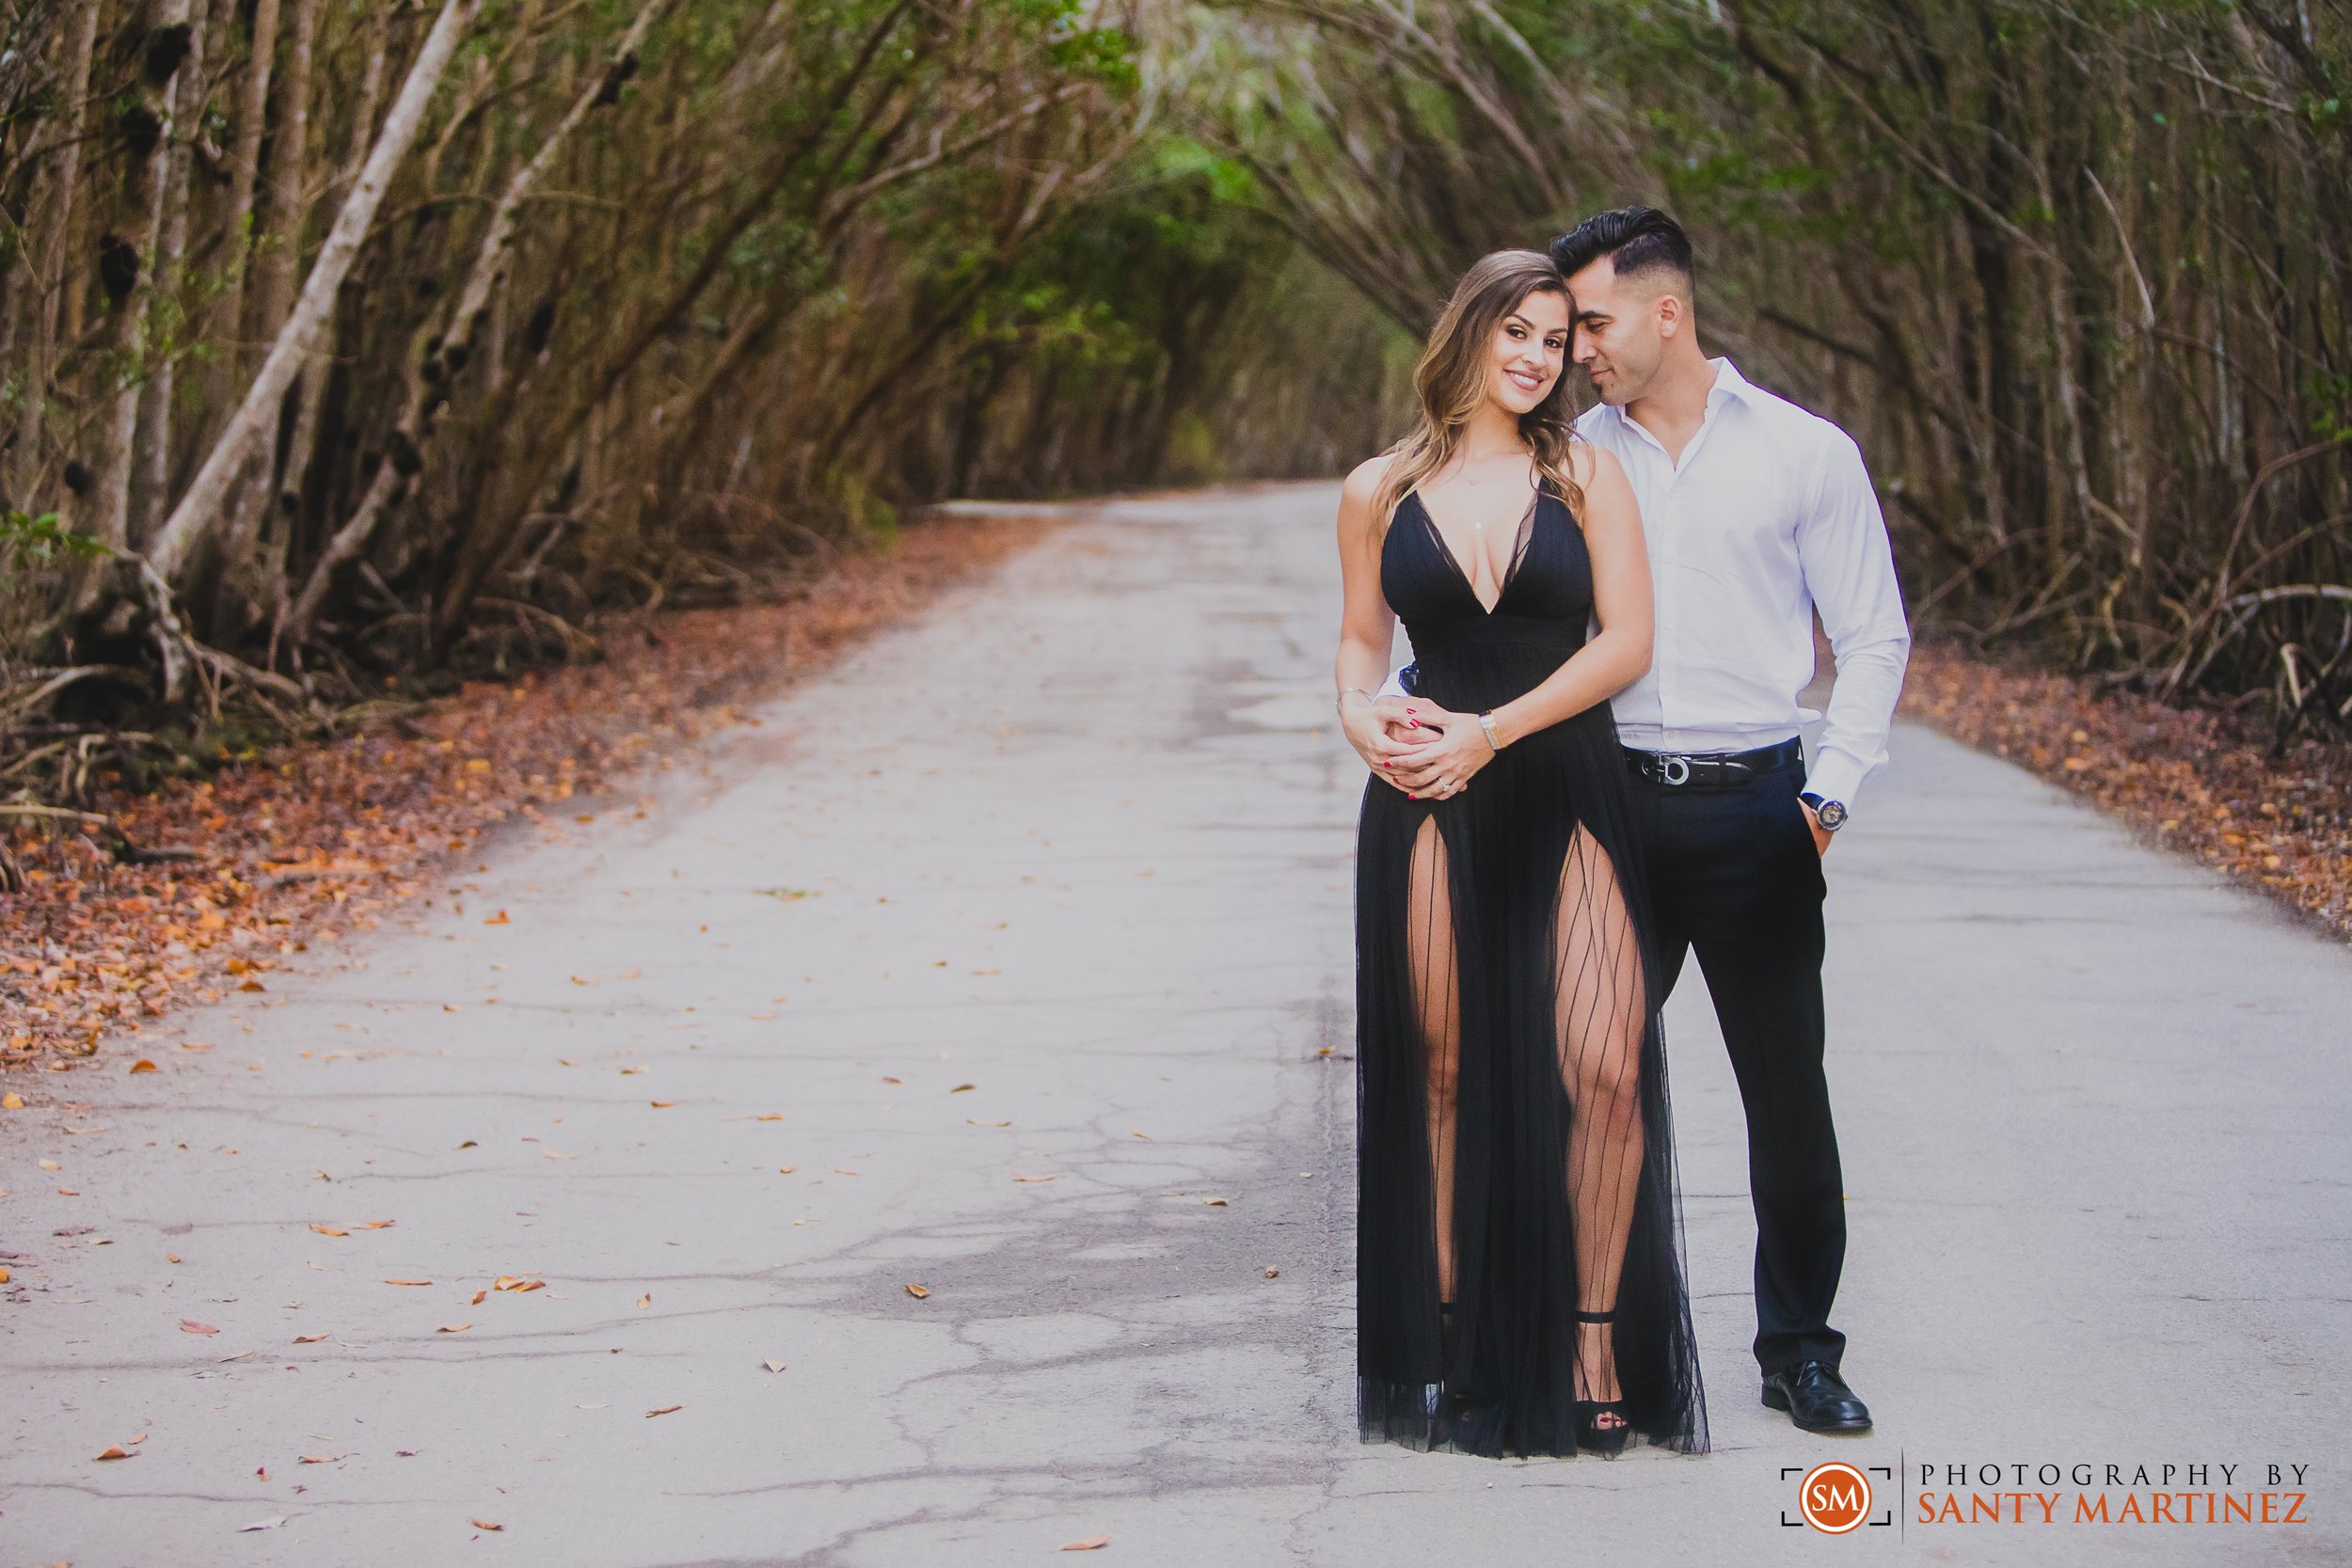 Miami Firefighter Engagement Session - Photography by Santy Martinez-20.jpg